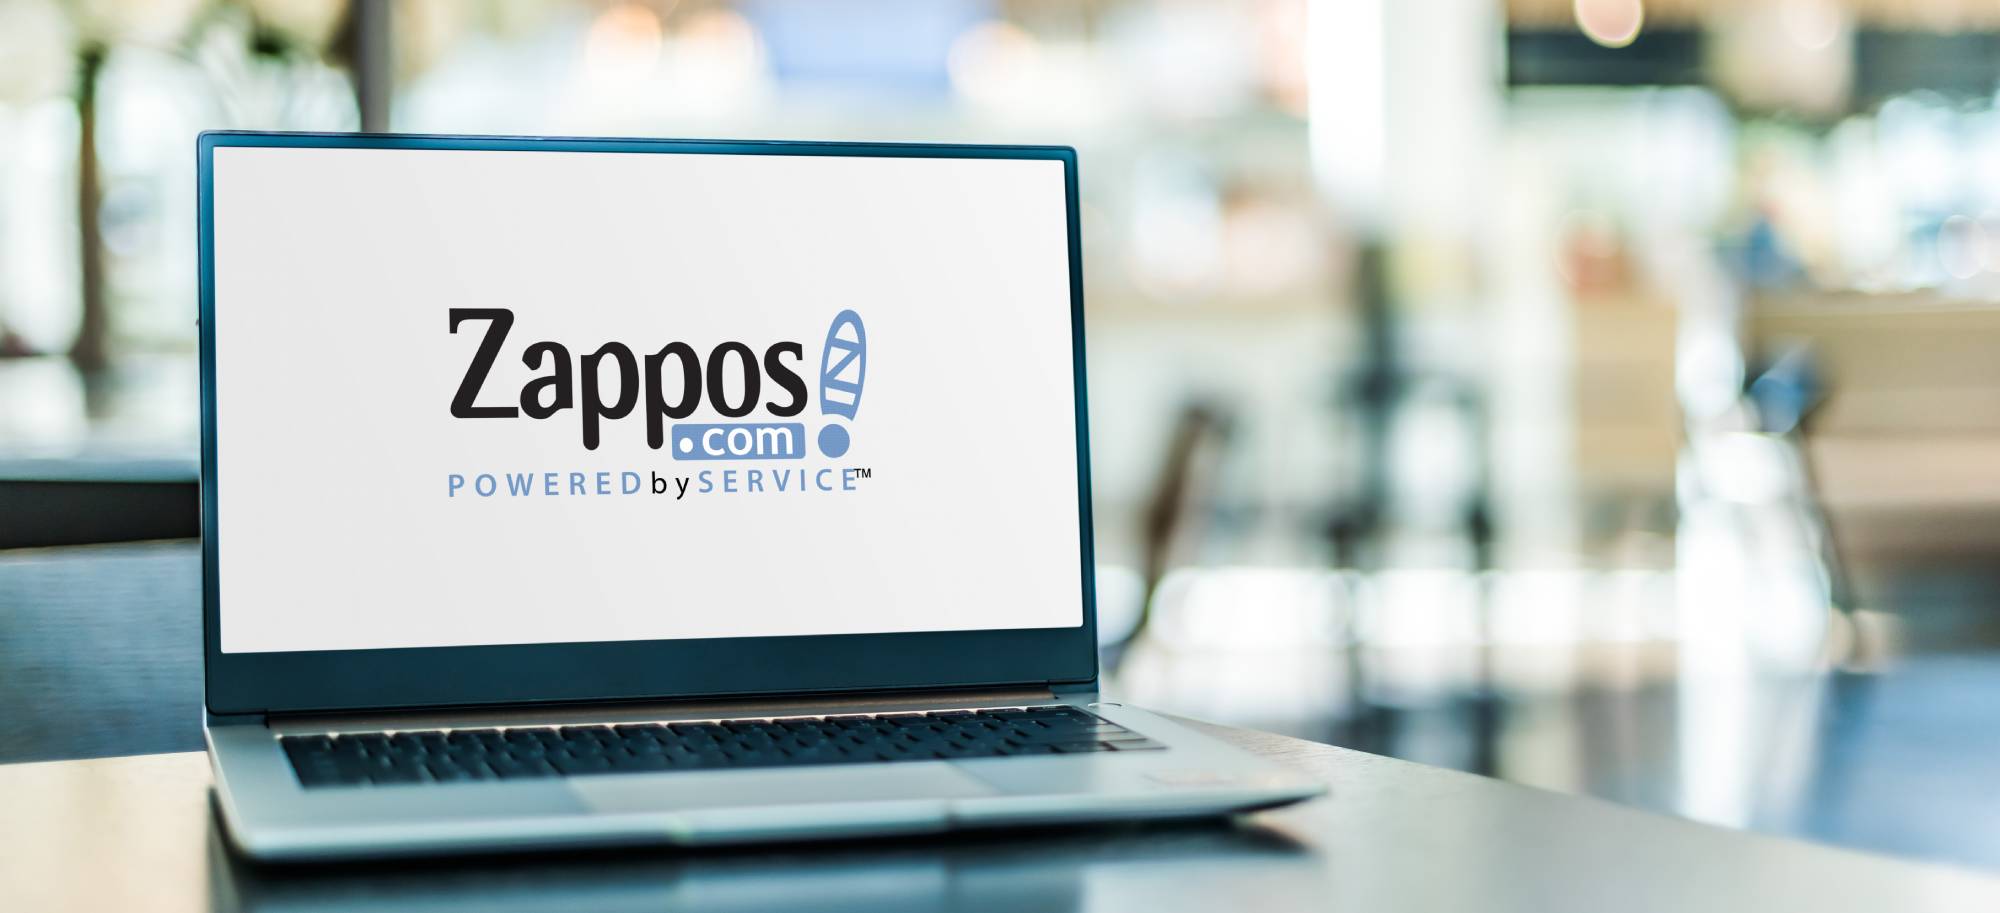 Zappos website open on a laptop with the background behind the laptop blurred